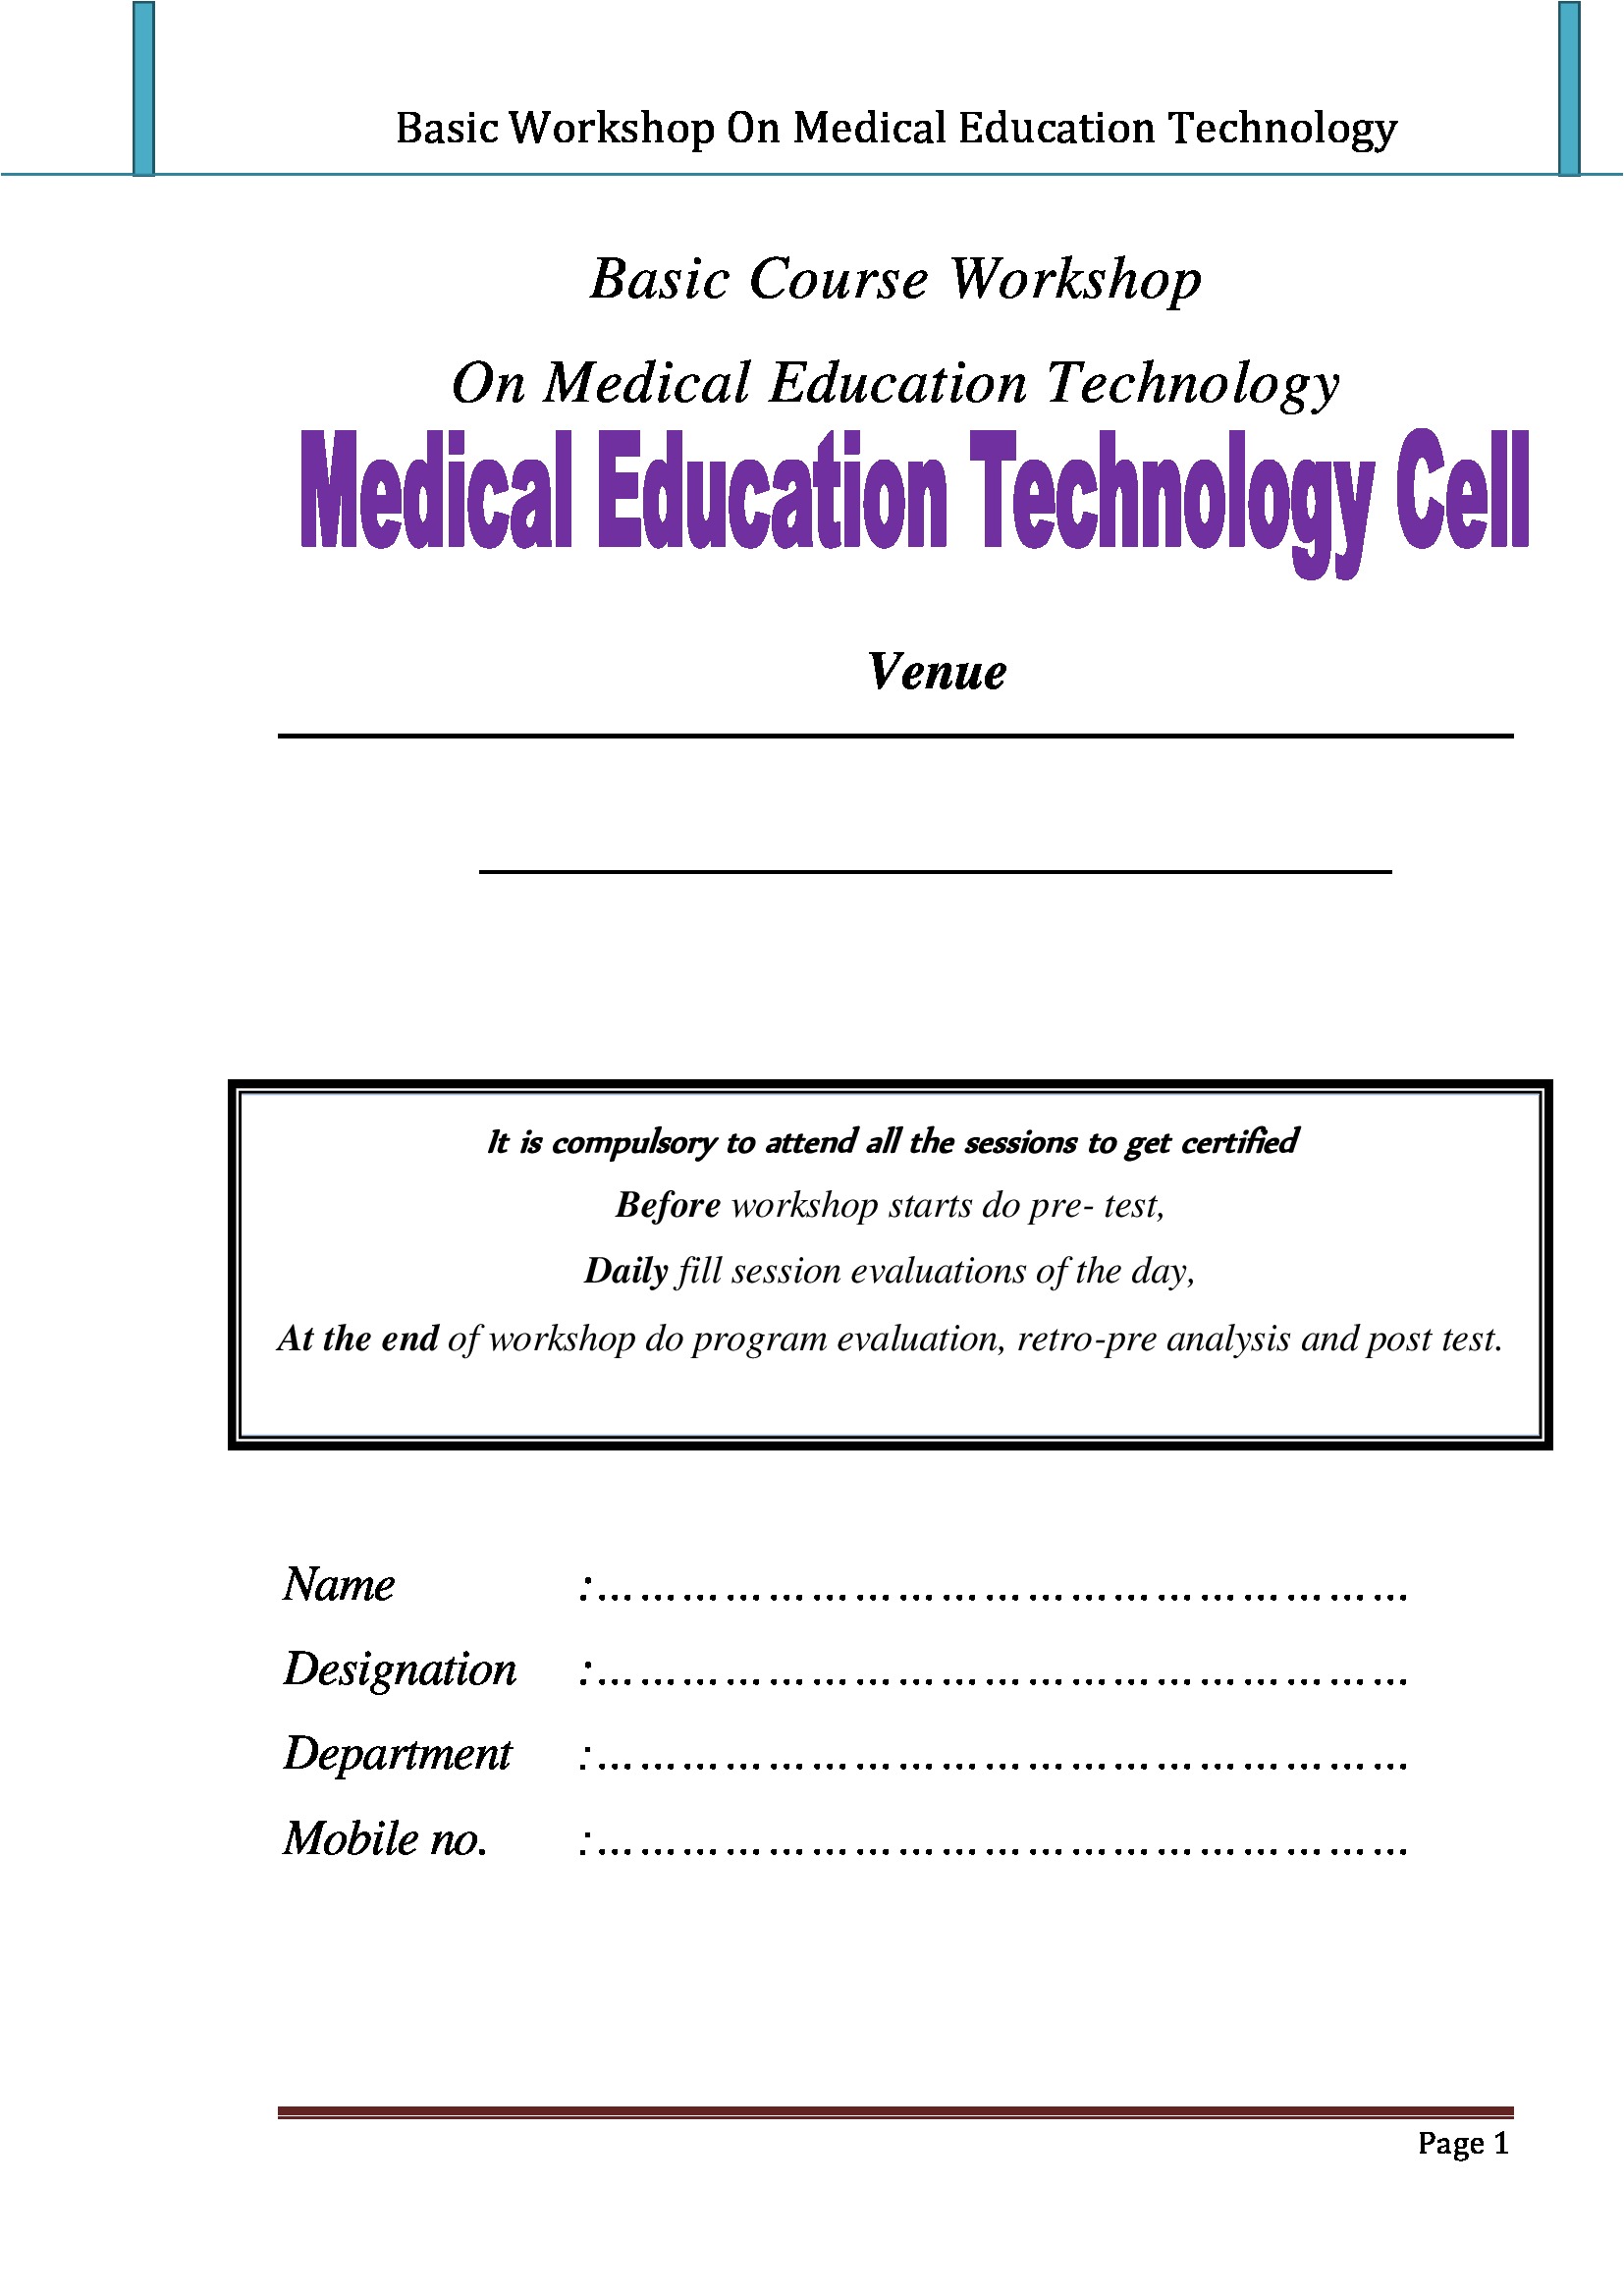 basic course in medical education technology